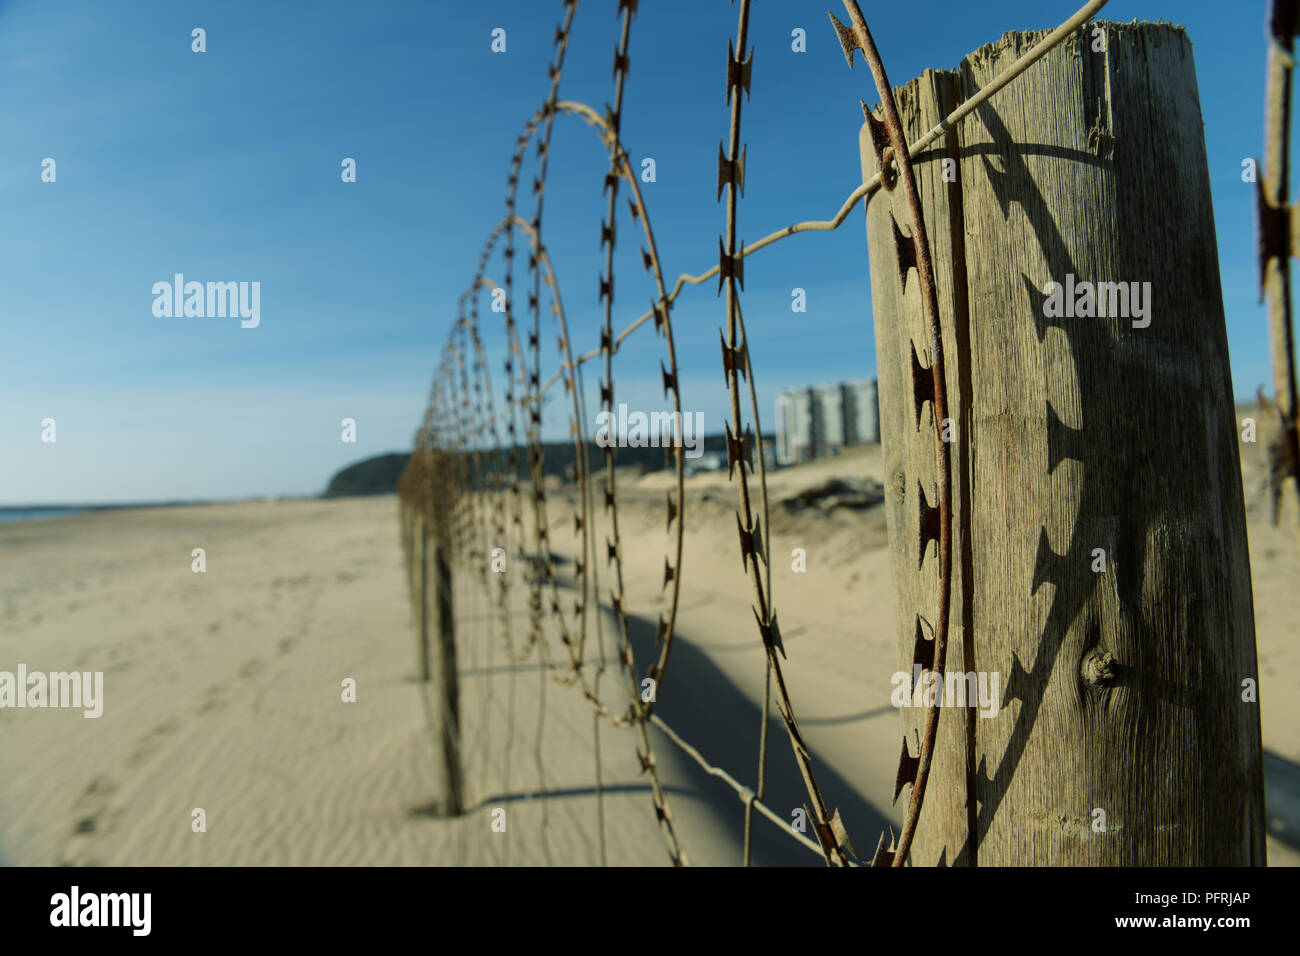 Durban, KwaZulu-Natal, South Africa, weathered fence line on beach where barbed wire is casting shadow on wooden fencepost, landscape, city Stock Photo